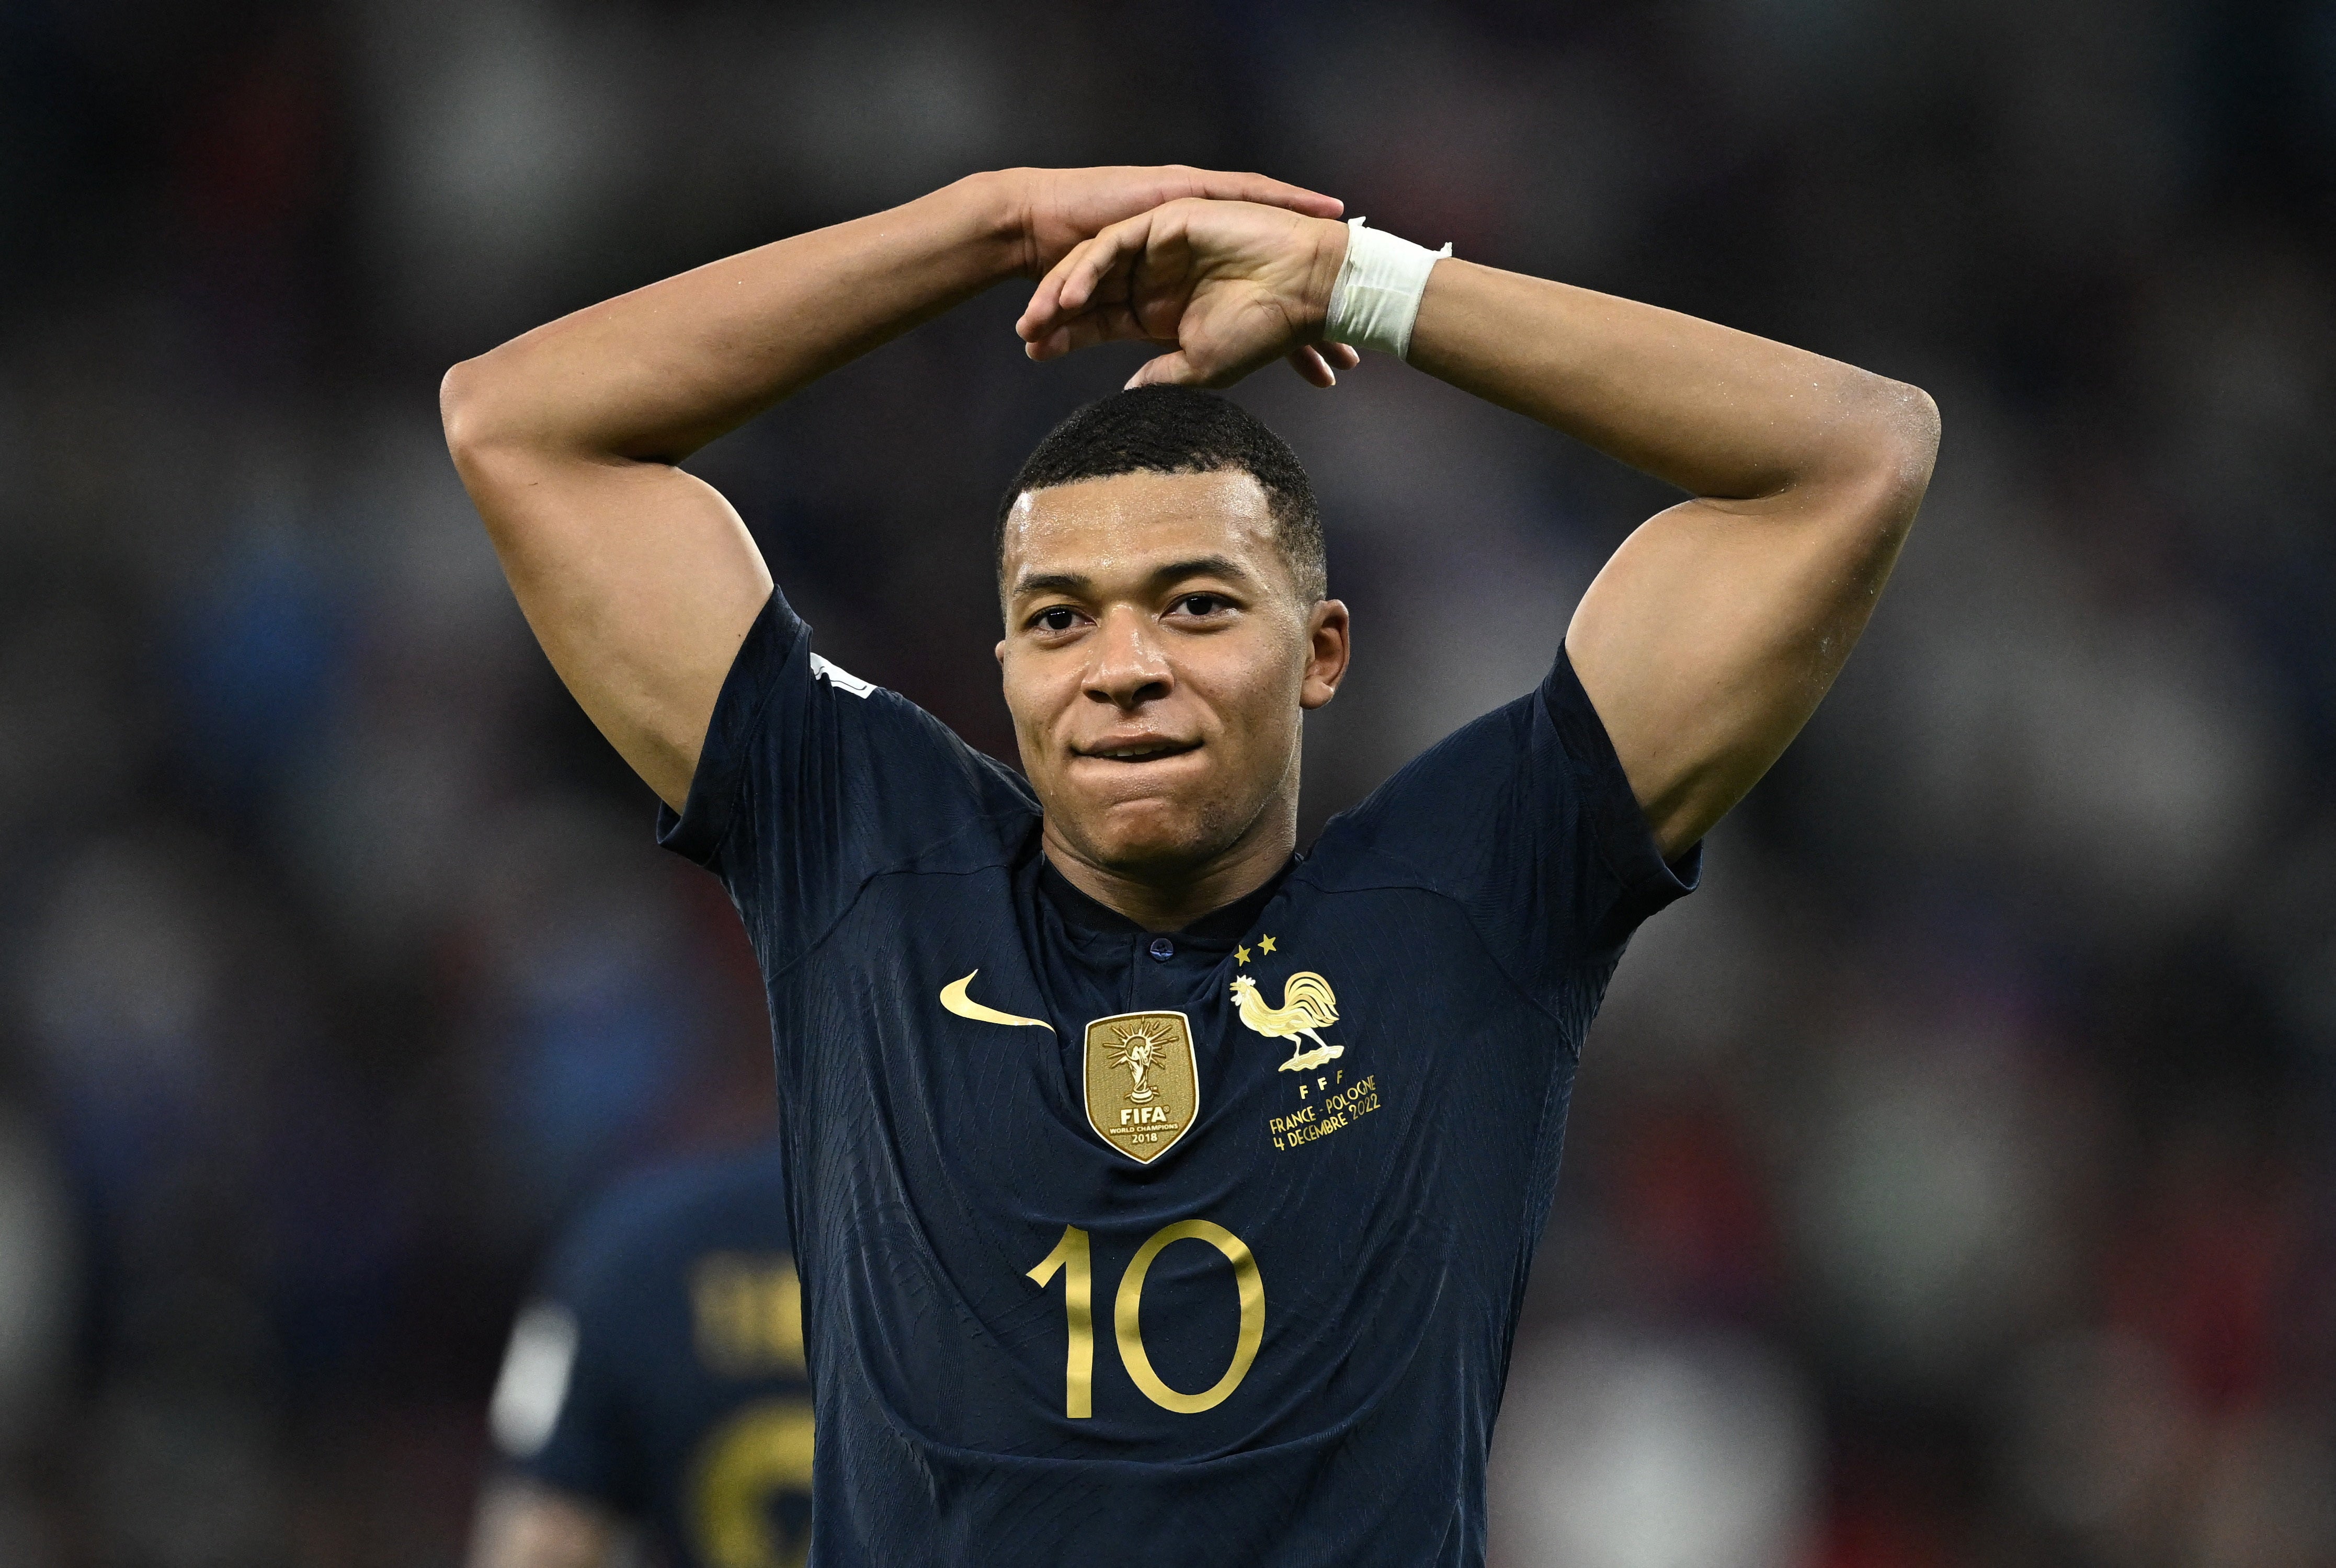 Mbappe scored two superb goals in France’s 3-1 win over Poland